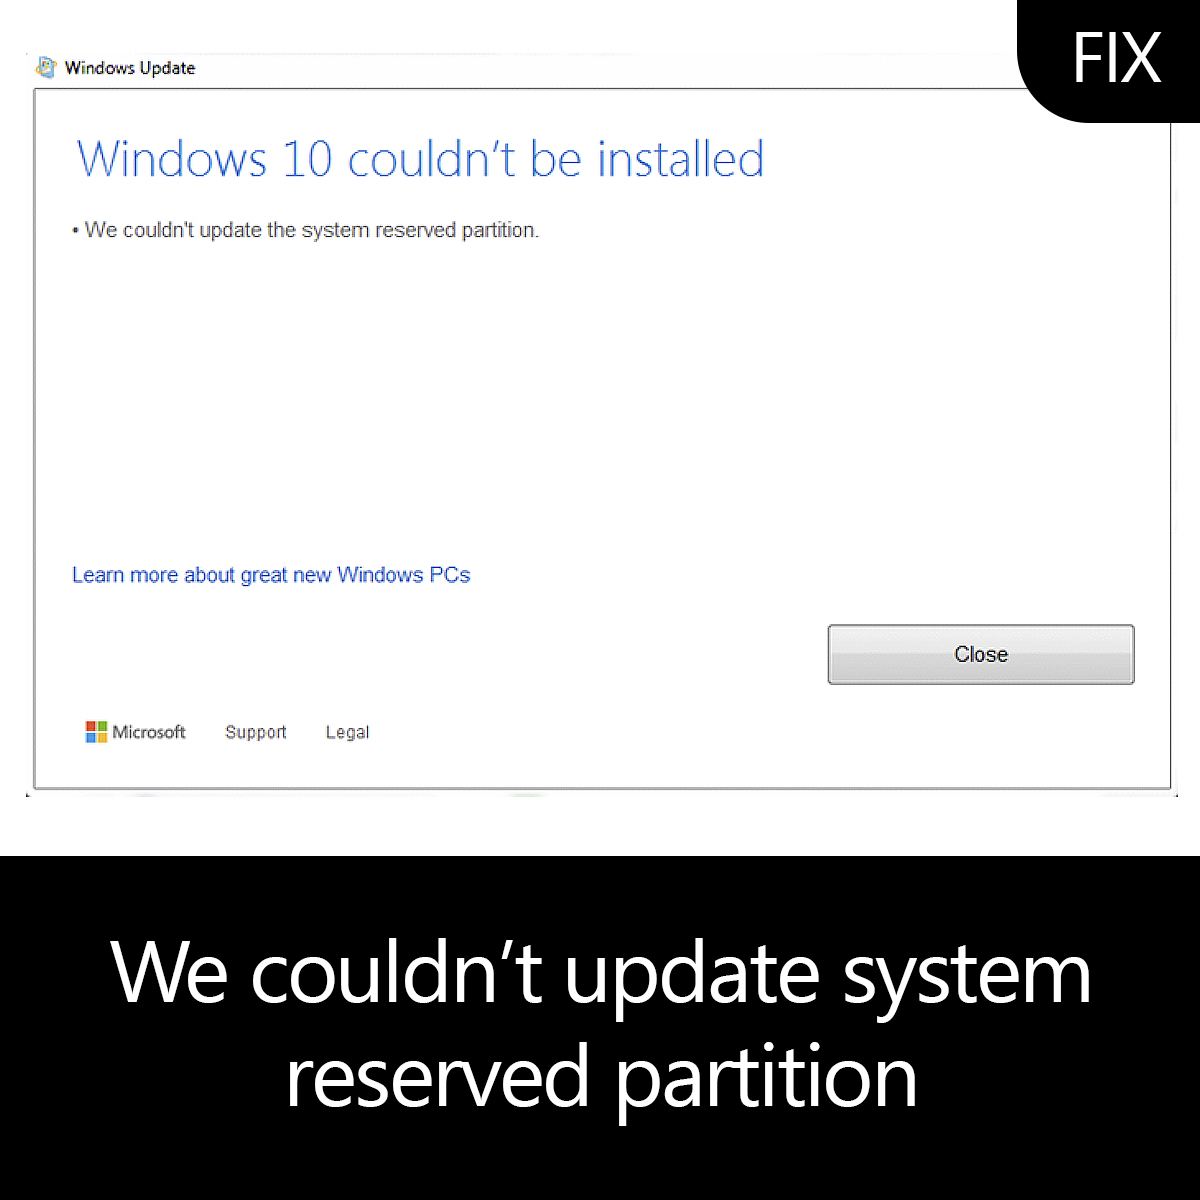 windows 10 cannot update reserved partition